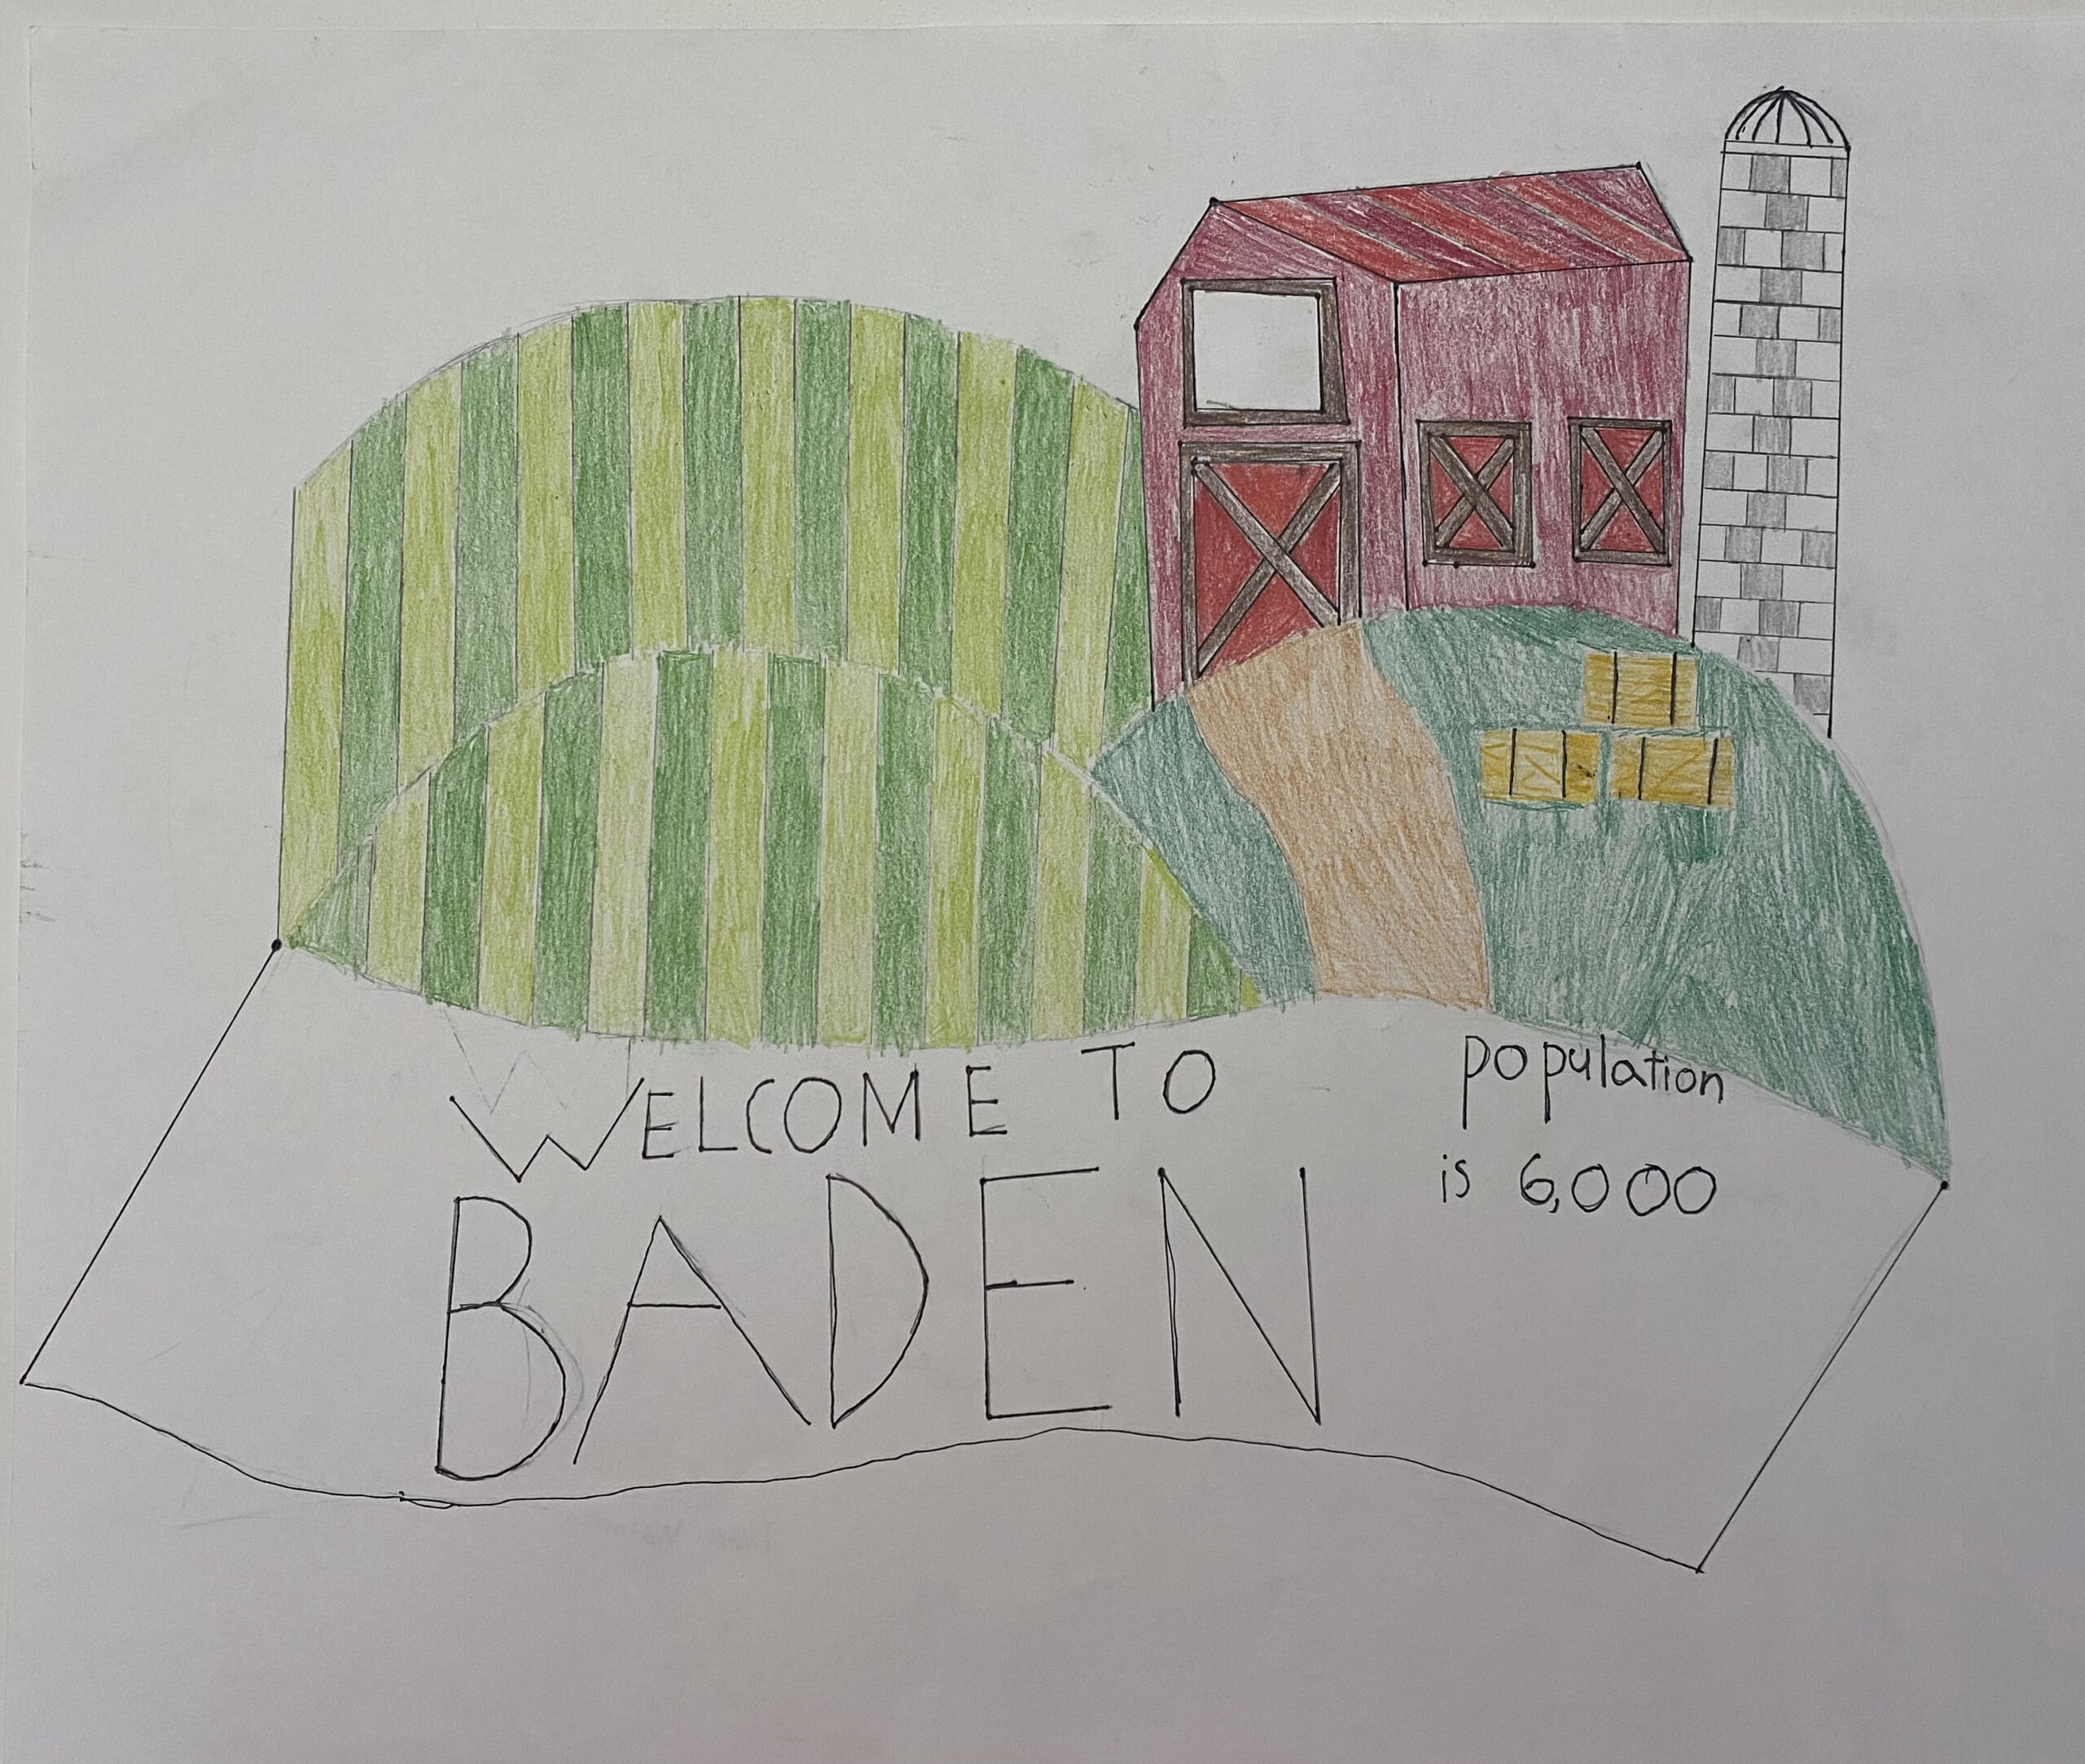 welcome to Baden sign by Evan